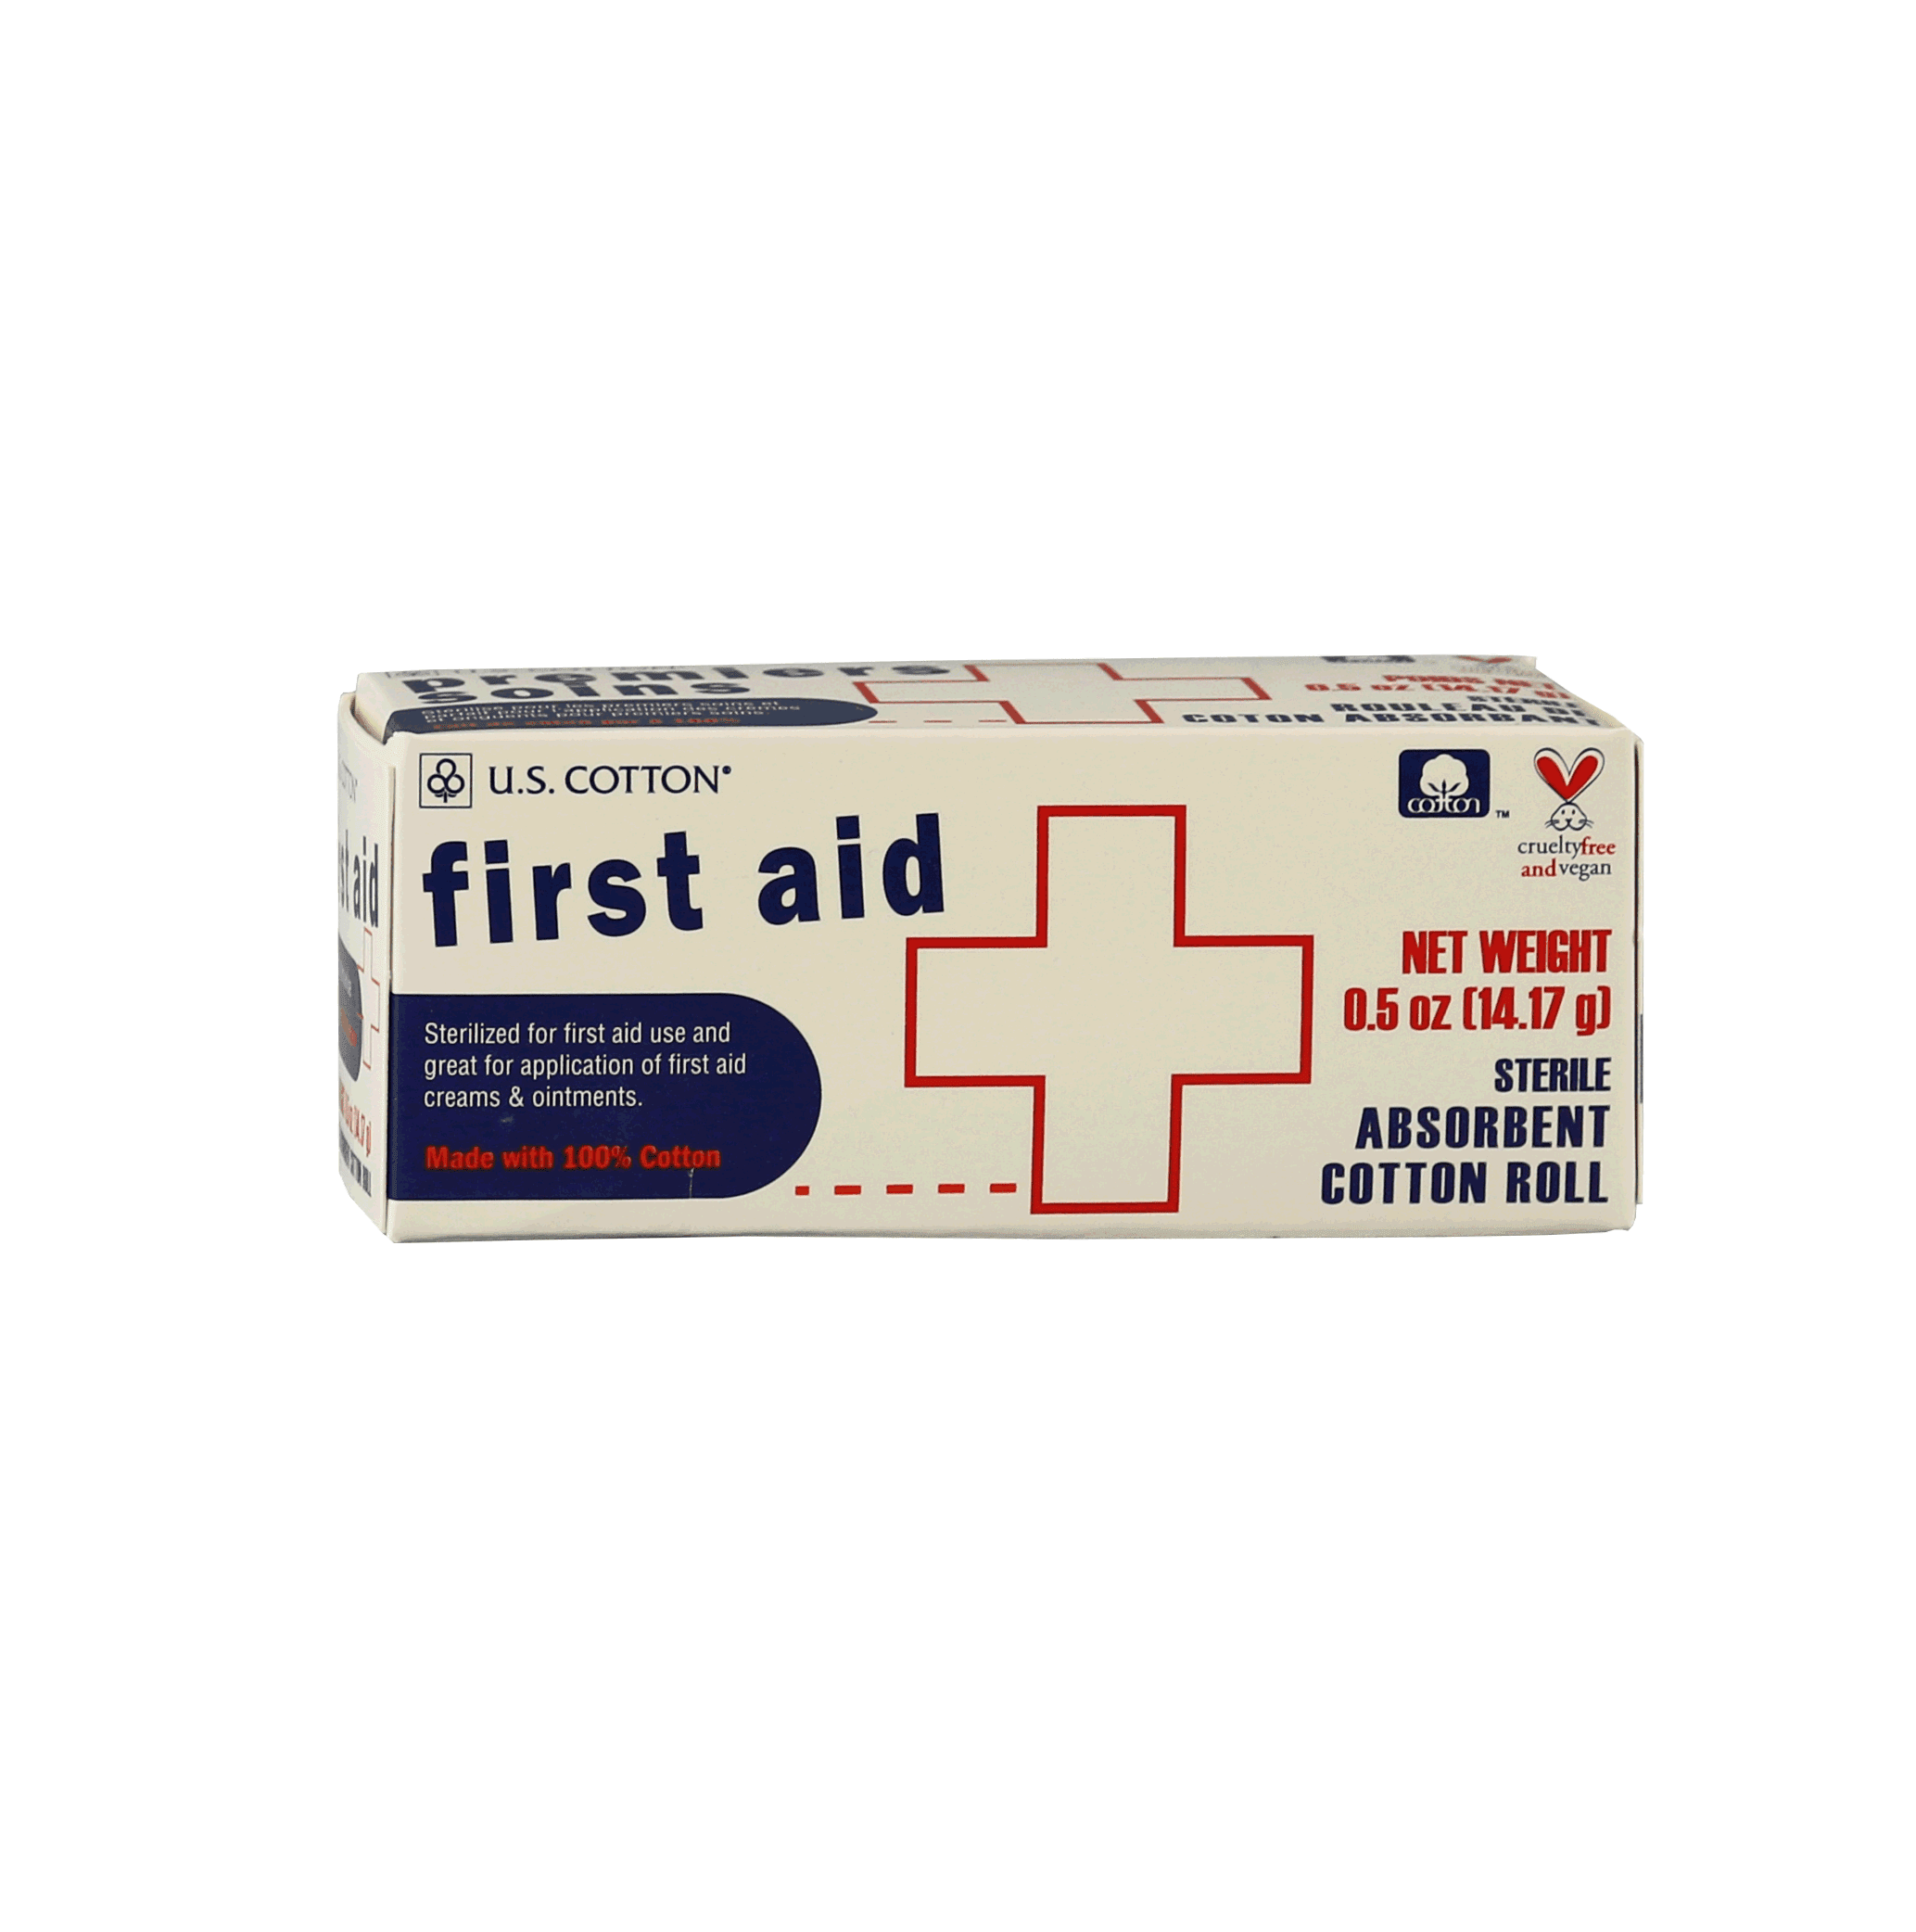 First Aid Cotton Roll  Sterile Absorbent Cotton Roll